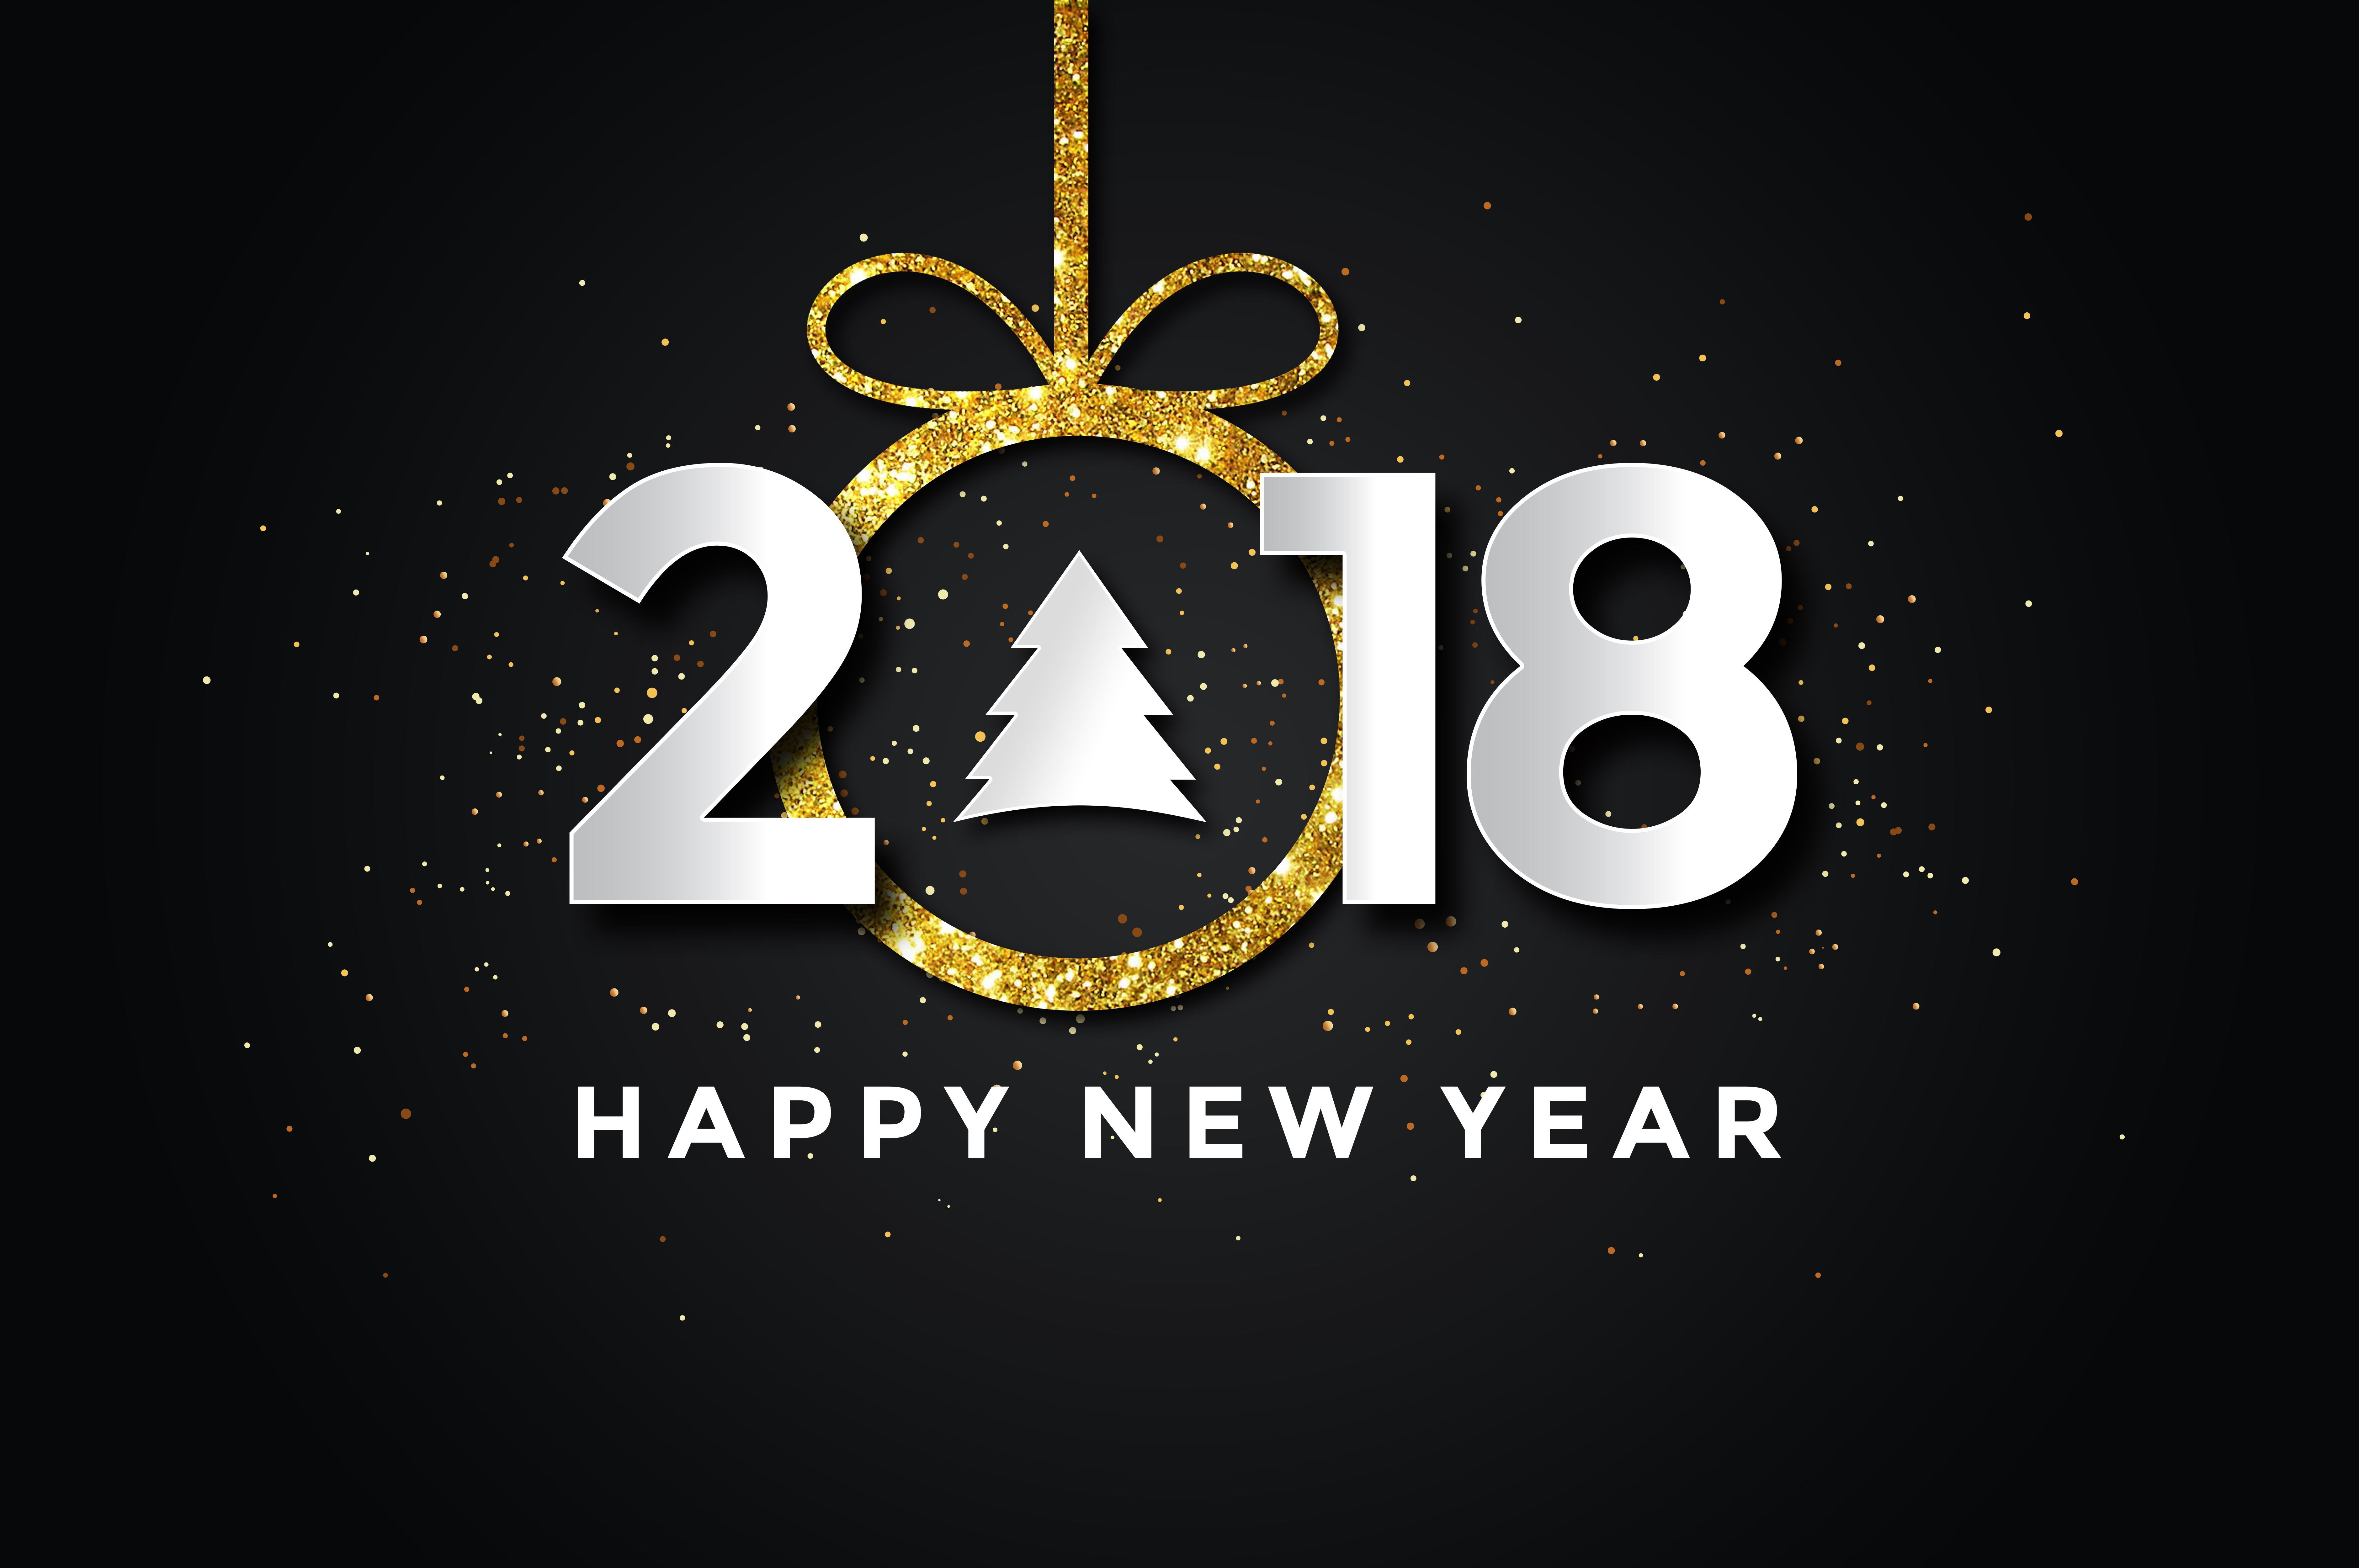 holiday, new year 2018, happy new year, new year